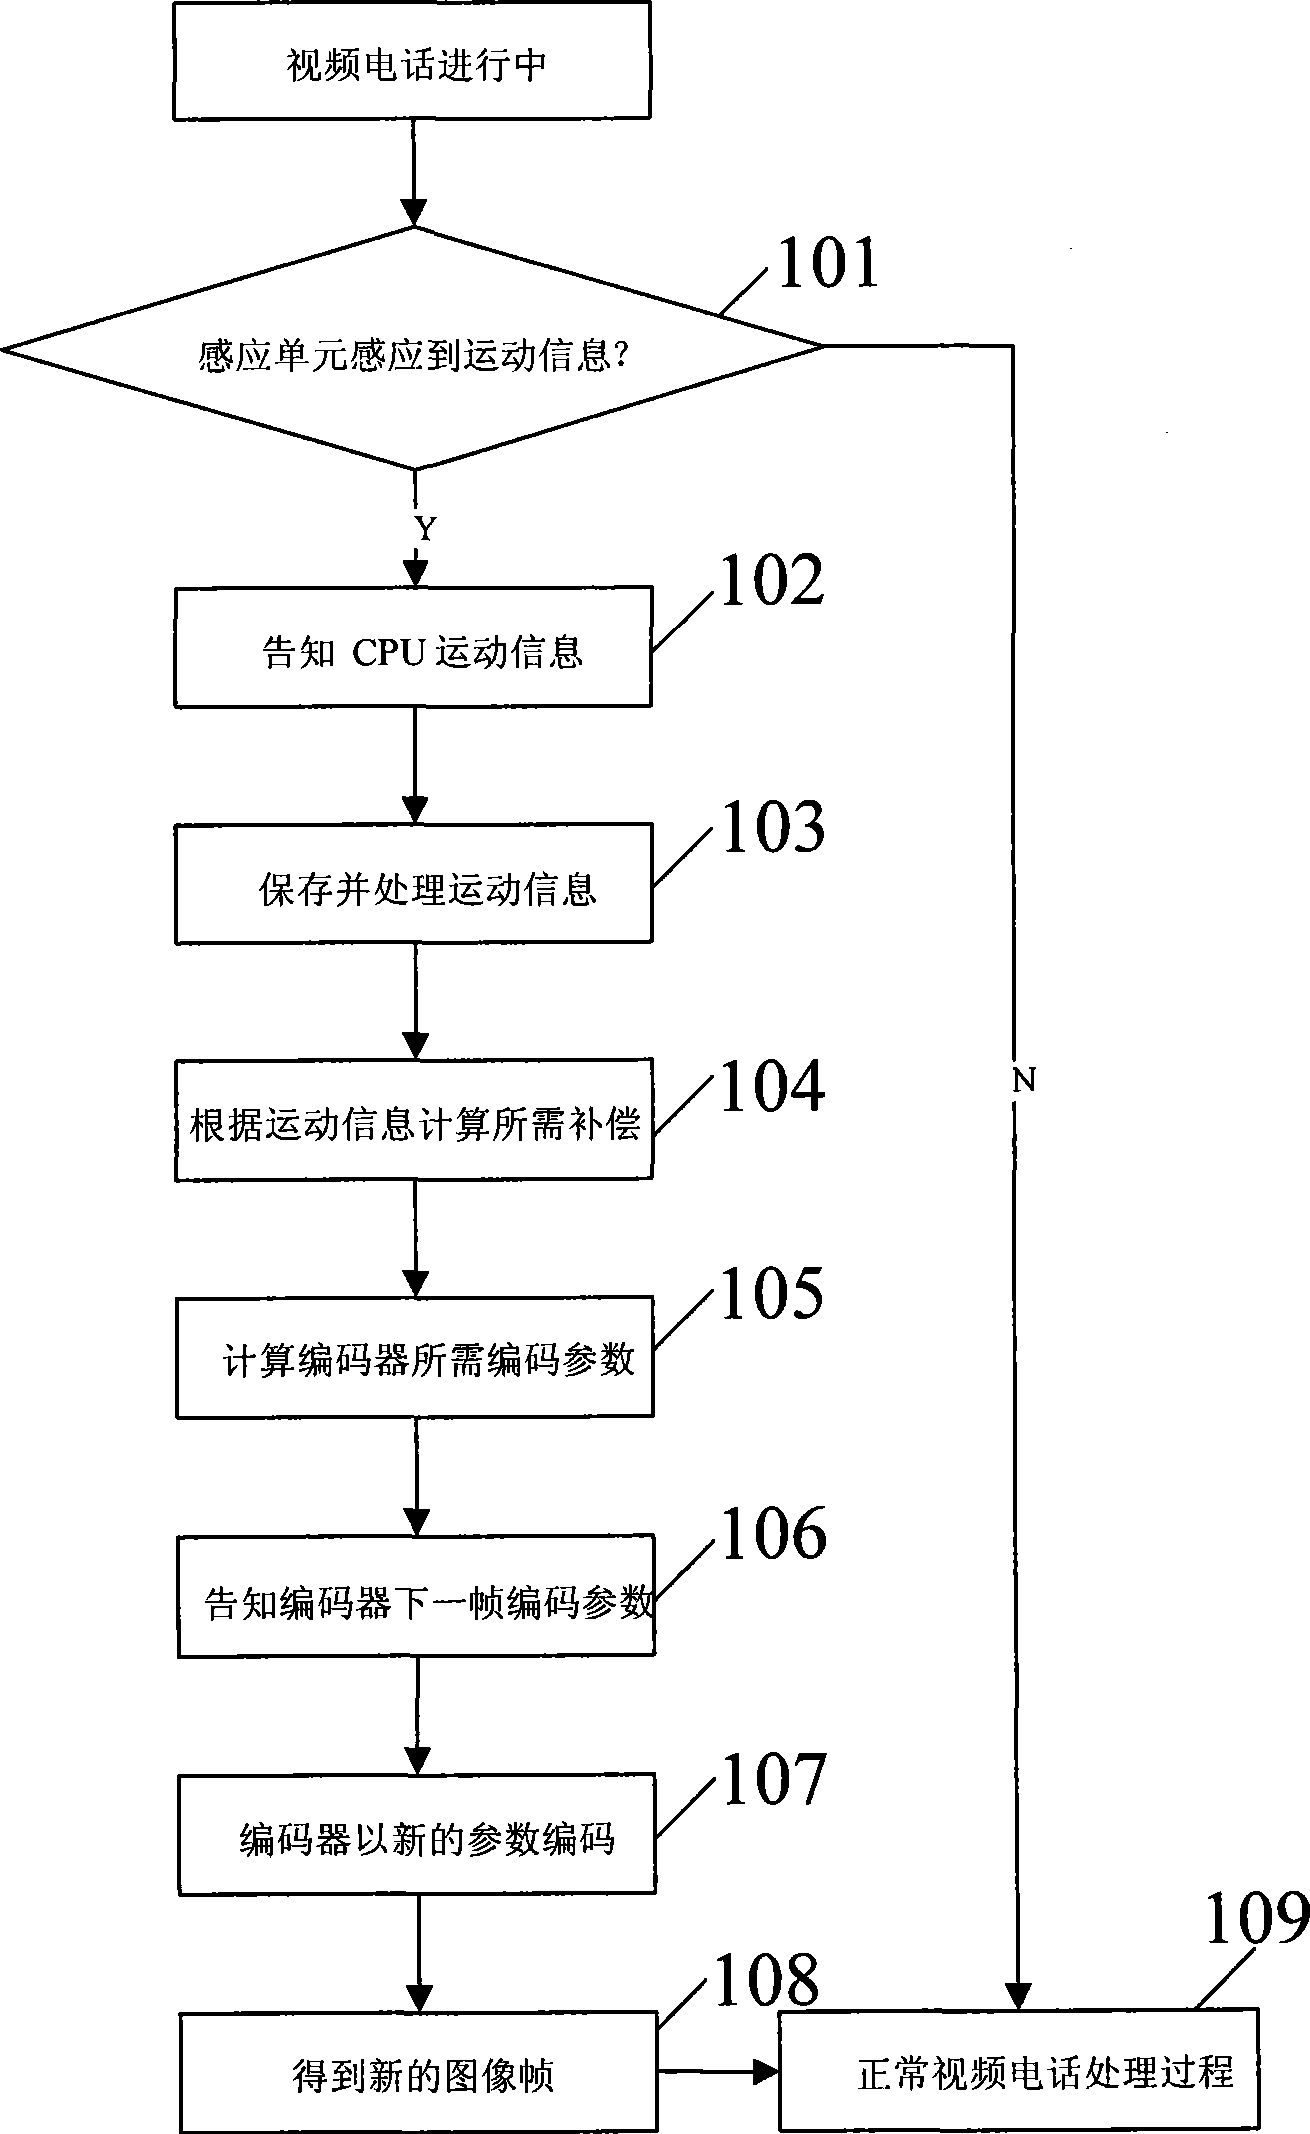 Visual telephone with movement perceptive function and method for enhancing image quality